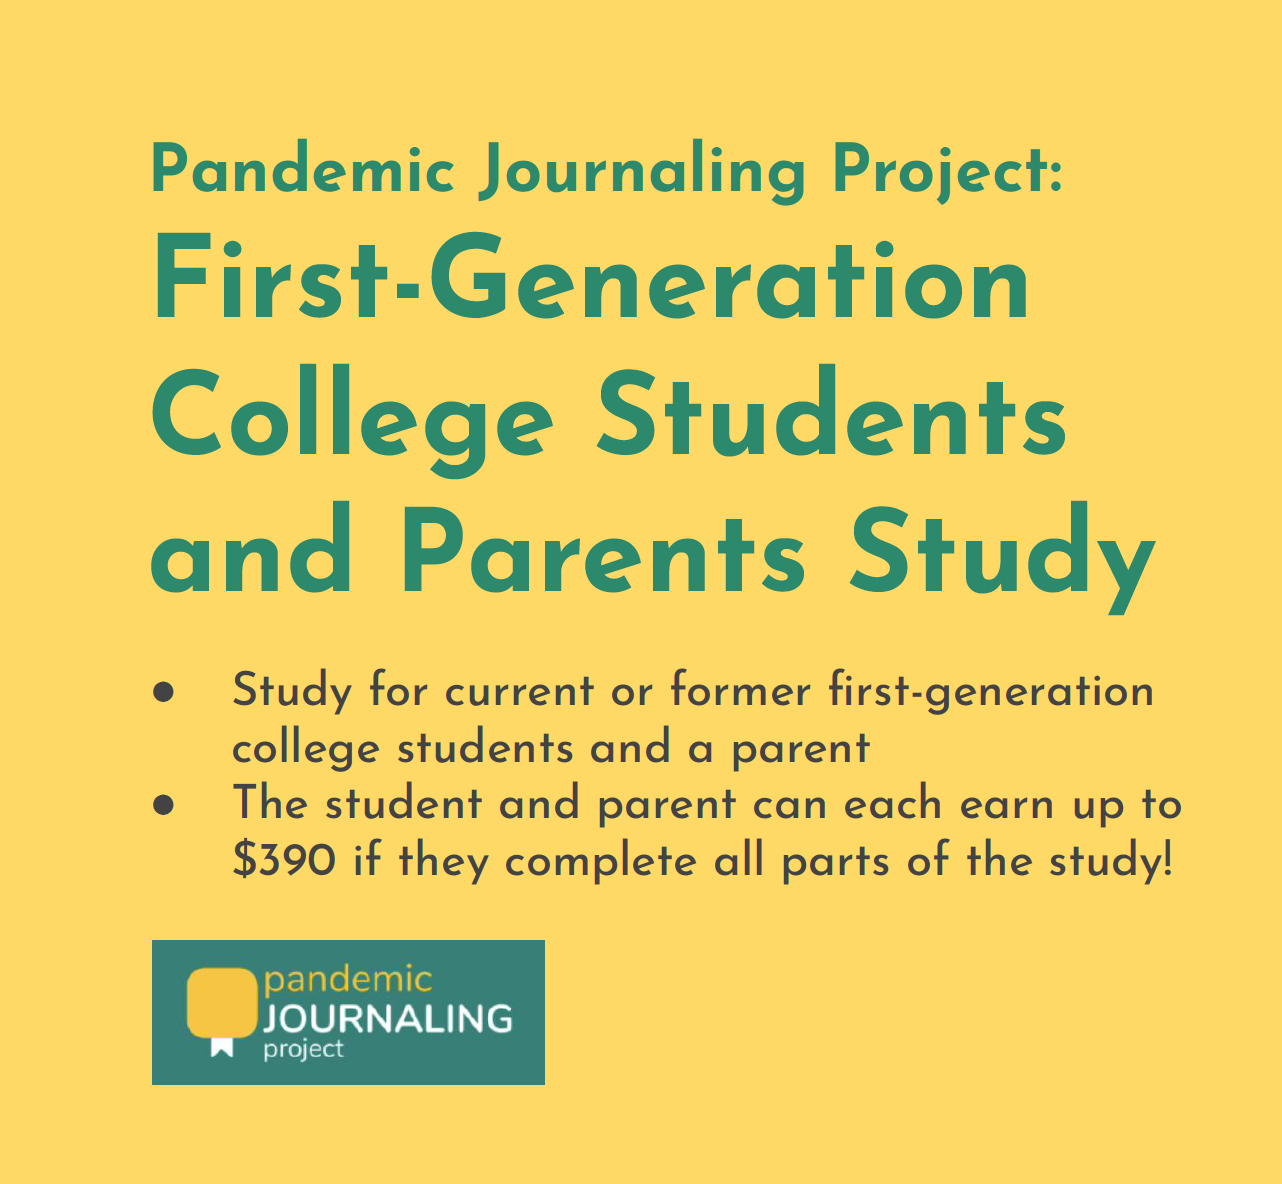 Graphic header introducing PJP First Generation College Students study